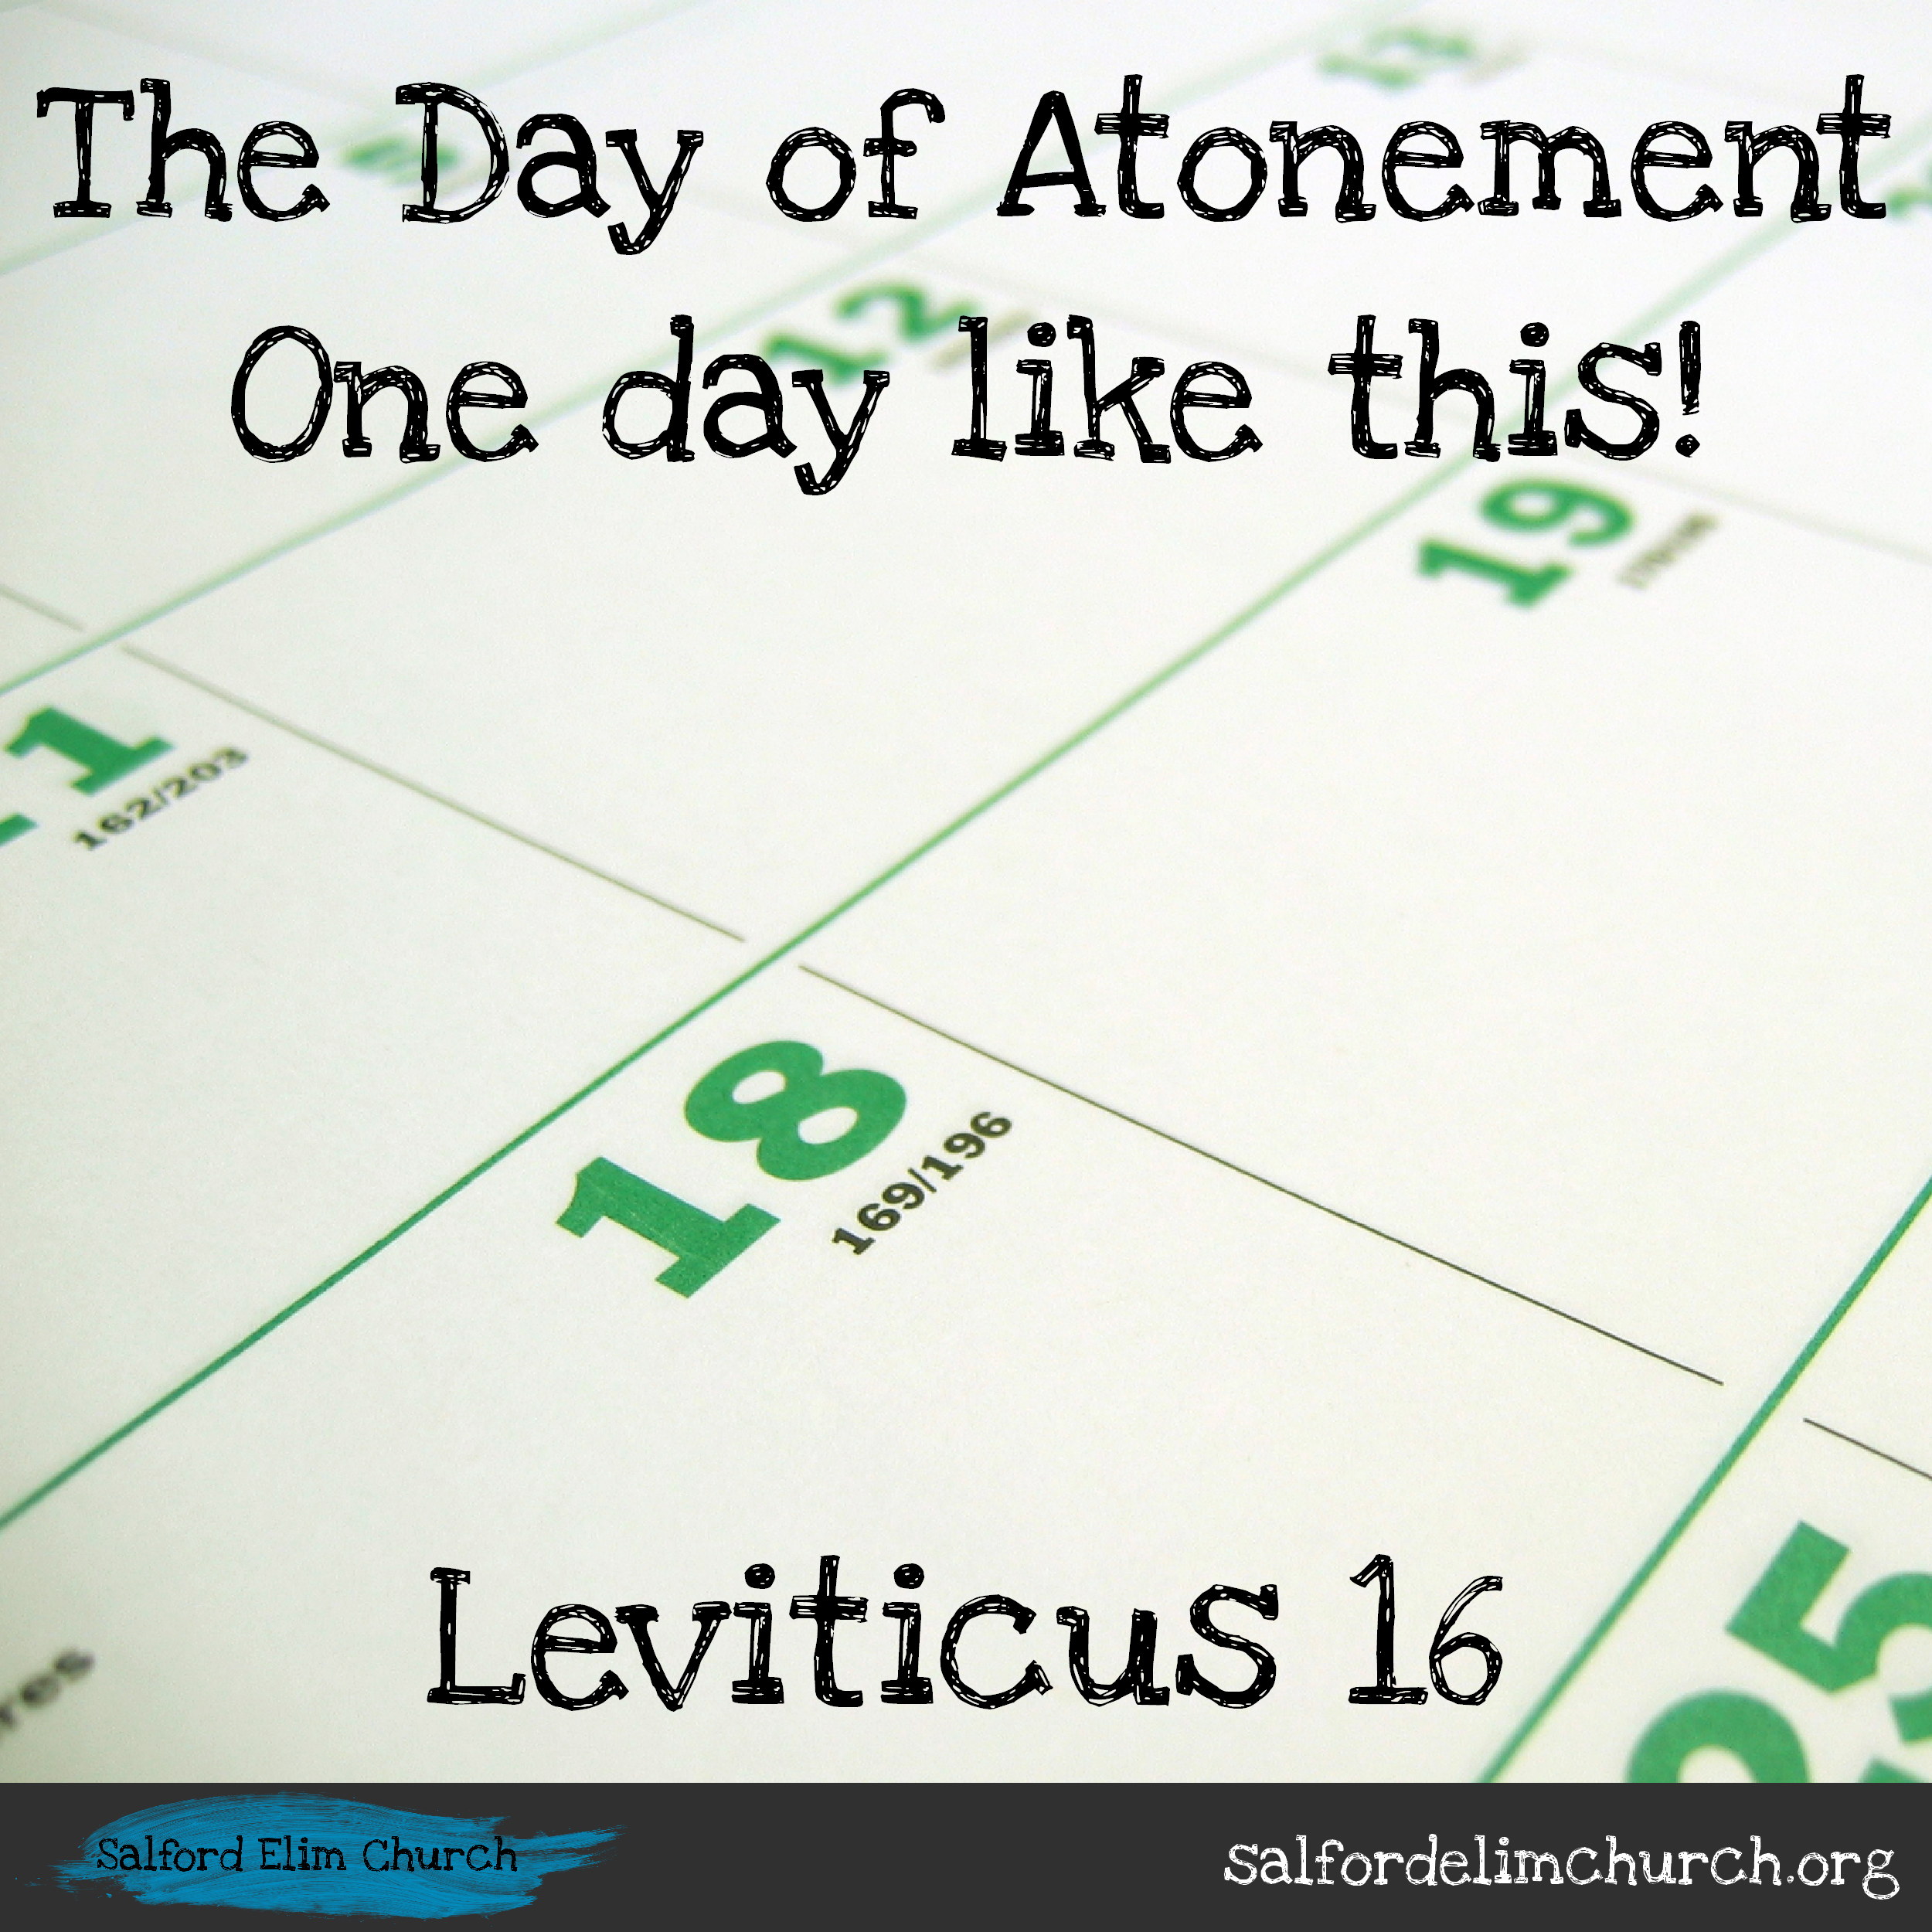 Leviticus 16 | The Day of Atonement - one day like this!